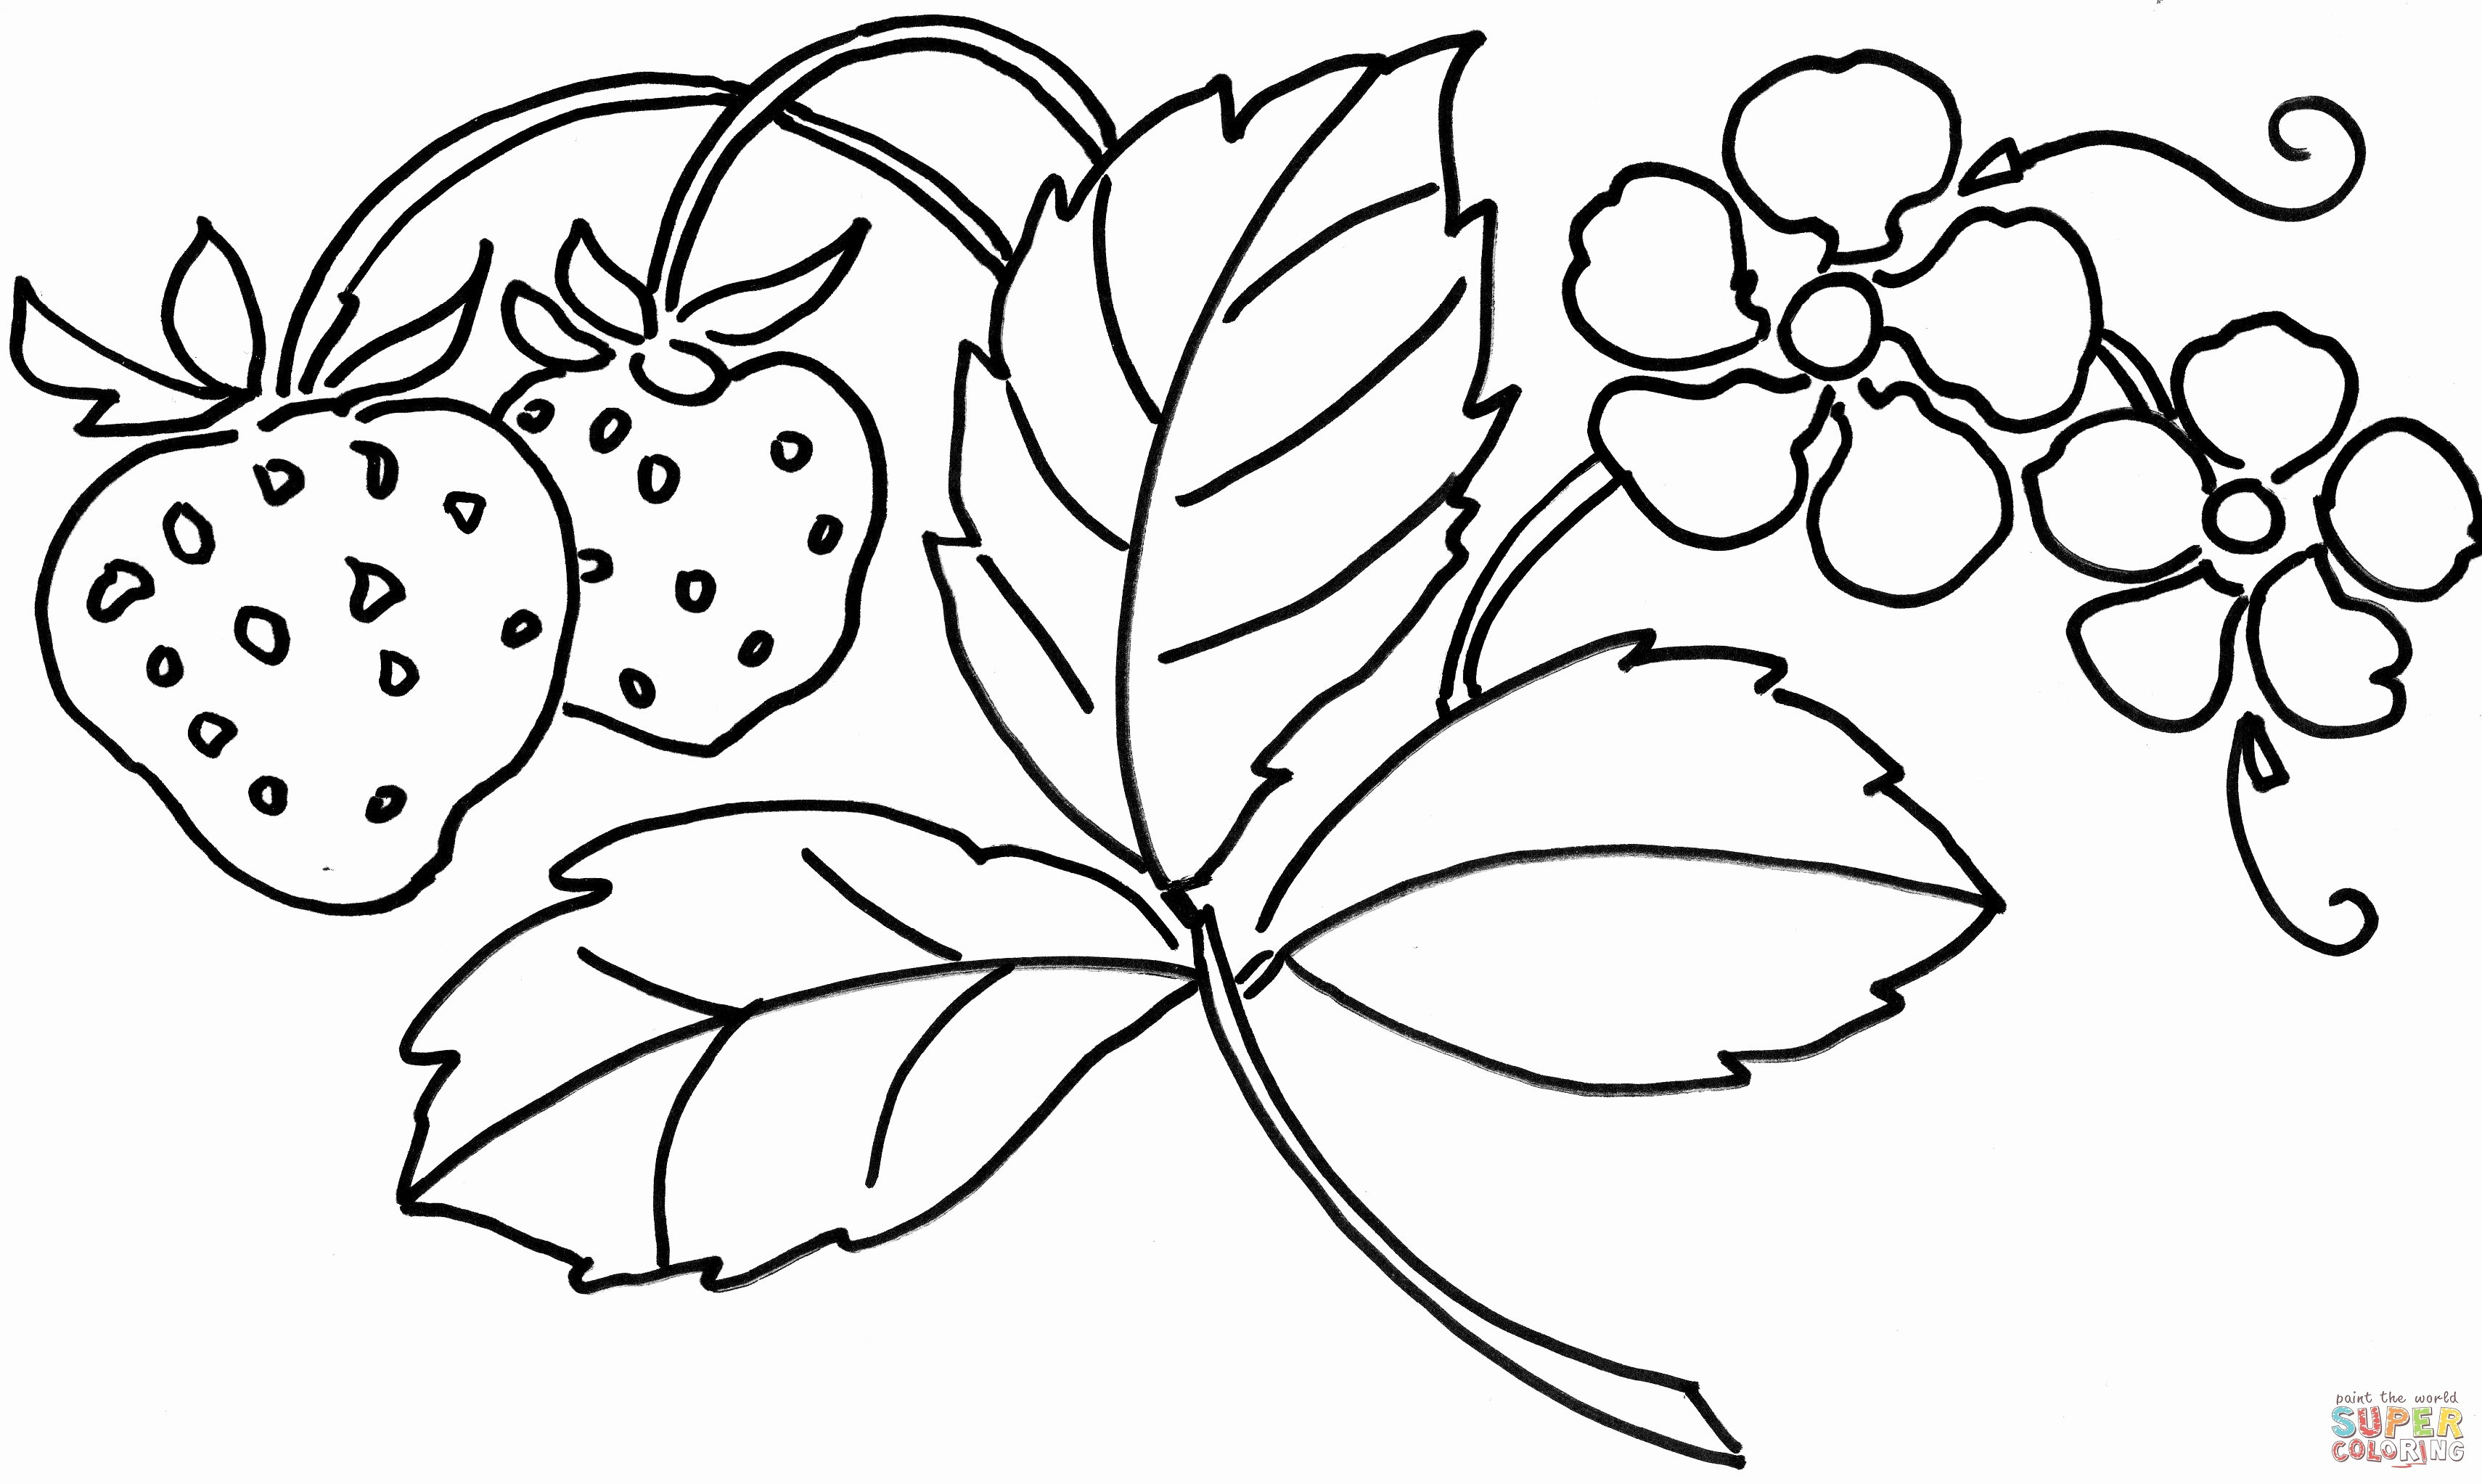 22 Unique Lily Flower In Vase 2024 free download lily flower in vase of new coloring pages flowers awesome vases flower vase coloring page within new coloring pages flowers awesome vases flower vase coloring page pages